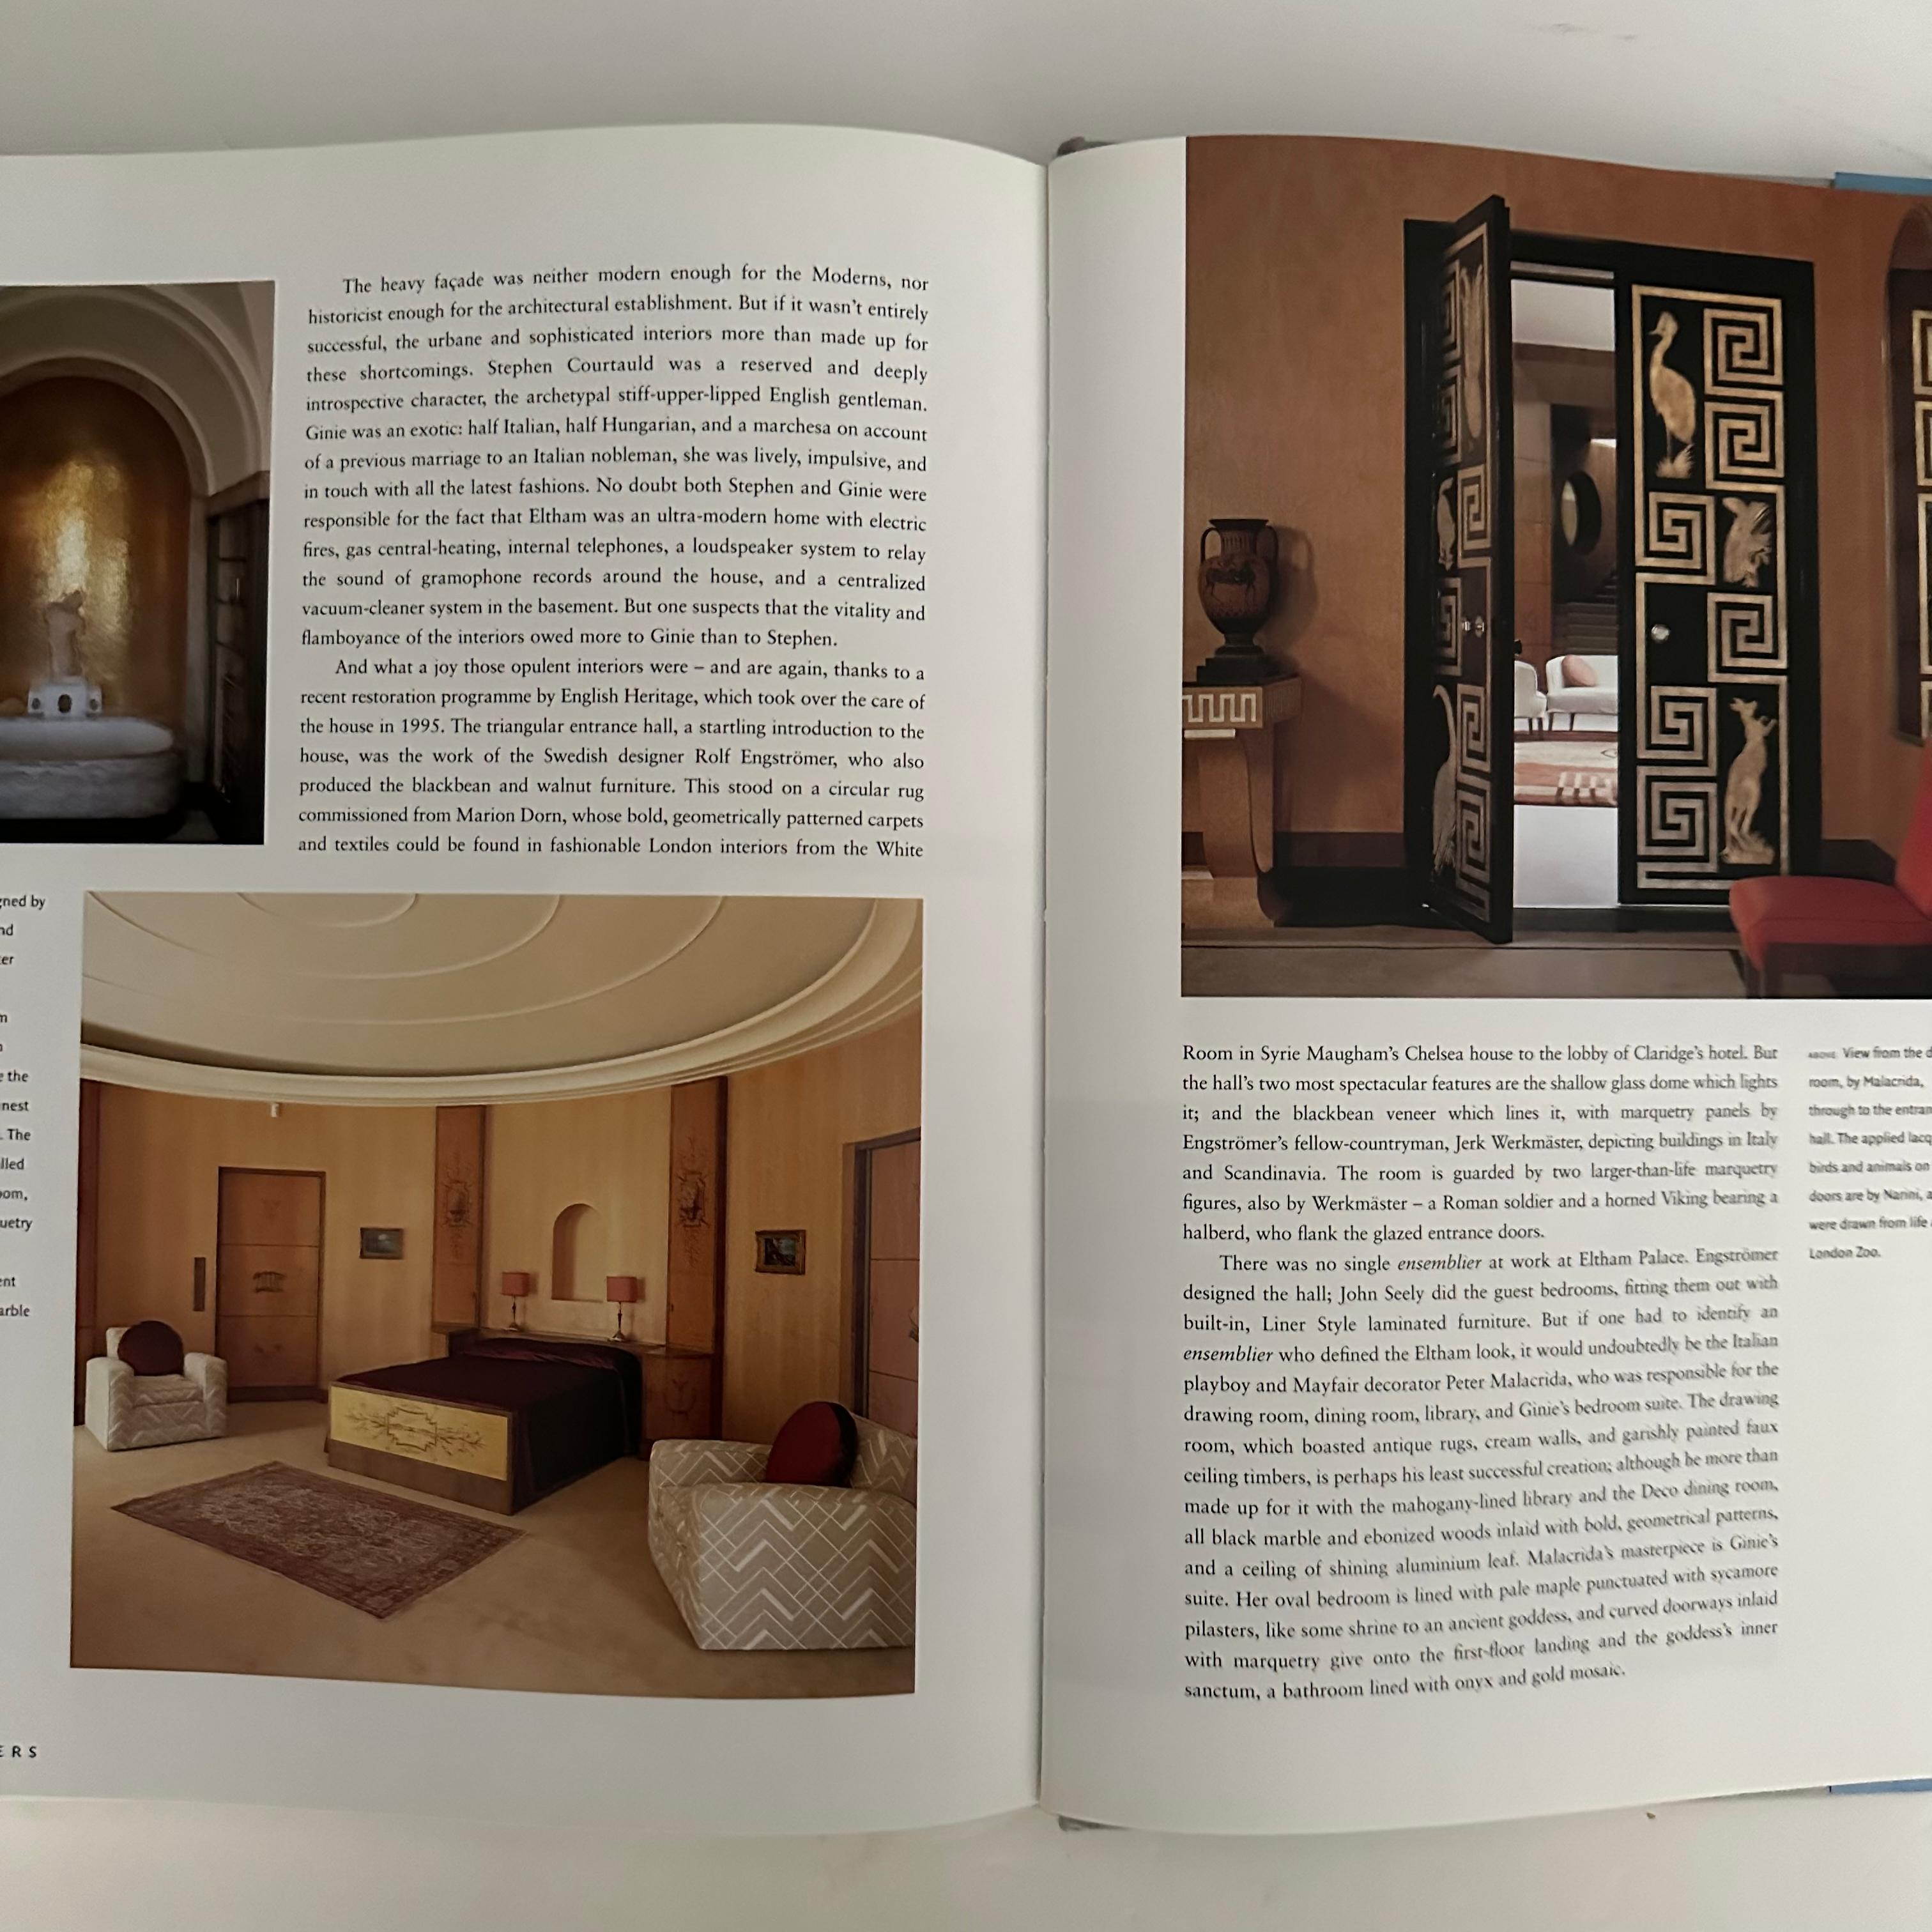 Published by Octopus Publishing Group first edition 2002 London. Hardback.

An essential reference work for those who appreciate Art Deco. Beautifully illustrated in black and white and colour photographs. Setting the groundwork for how the Art Deco